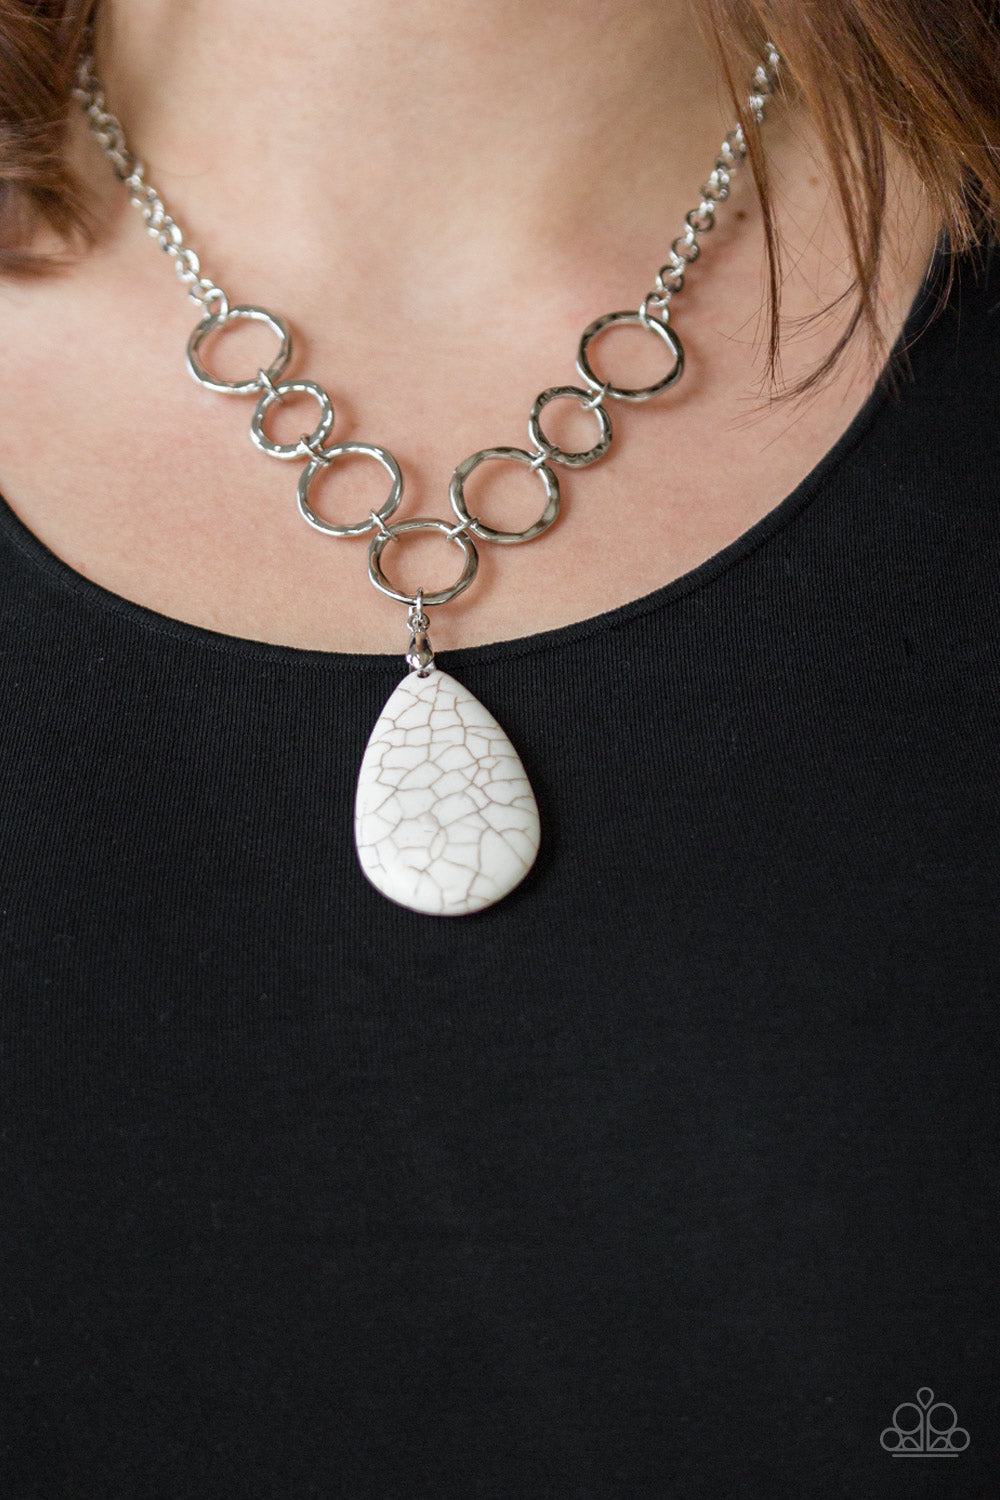 LIVIN ON A PRAIRIE - WHITE CRACKLE STONE TEARDROP NECKLACE